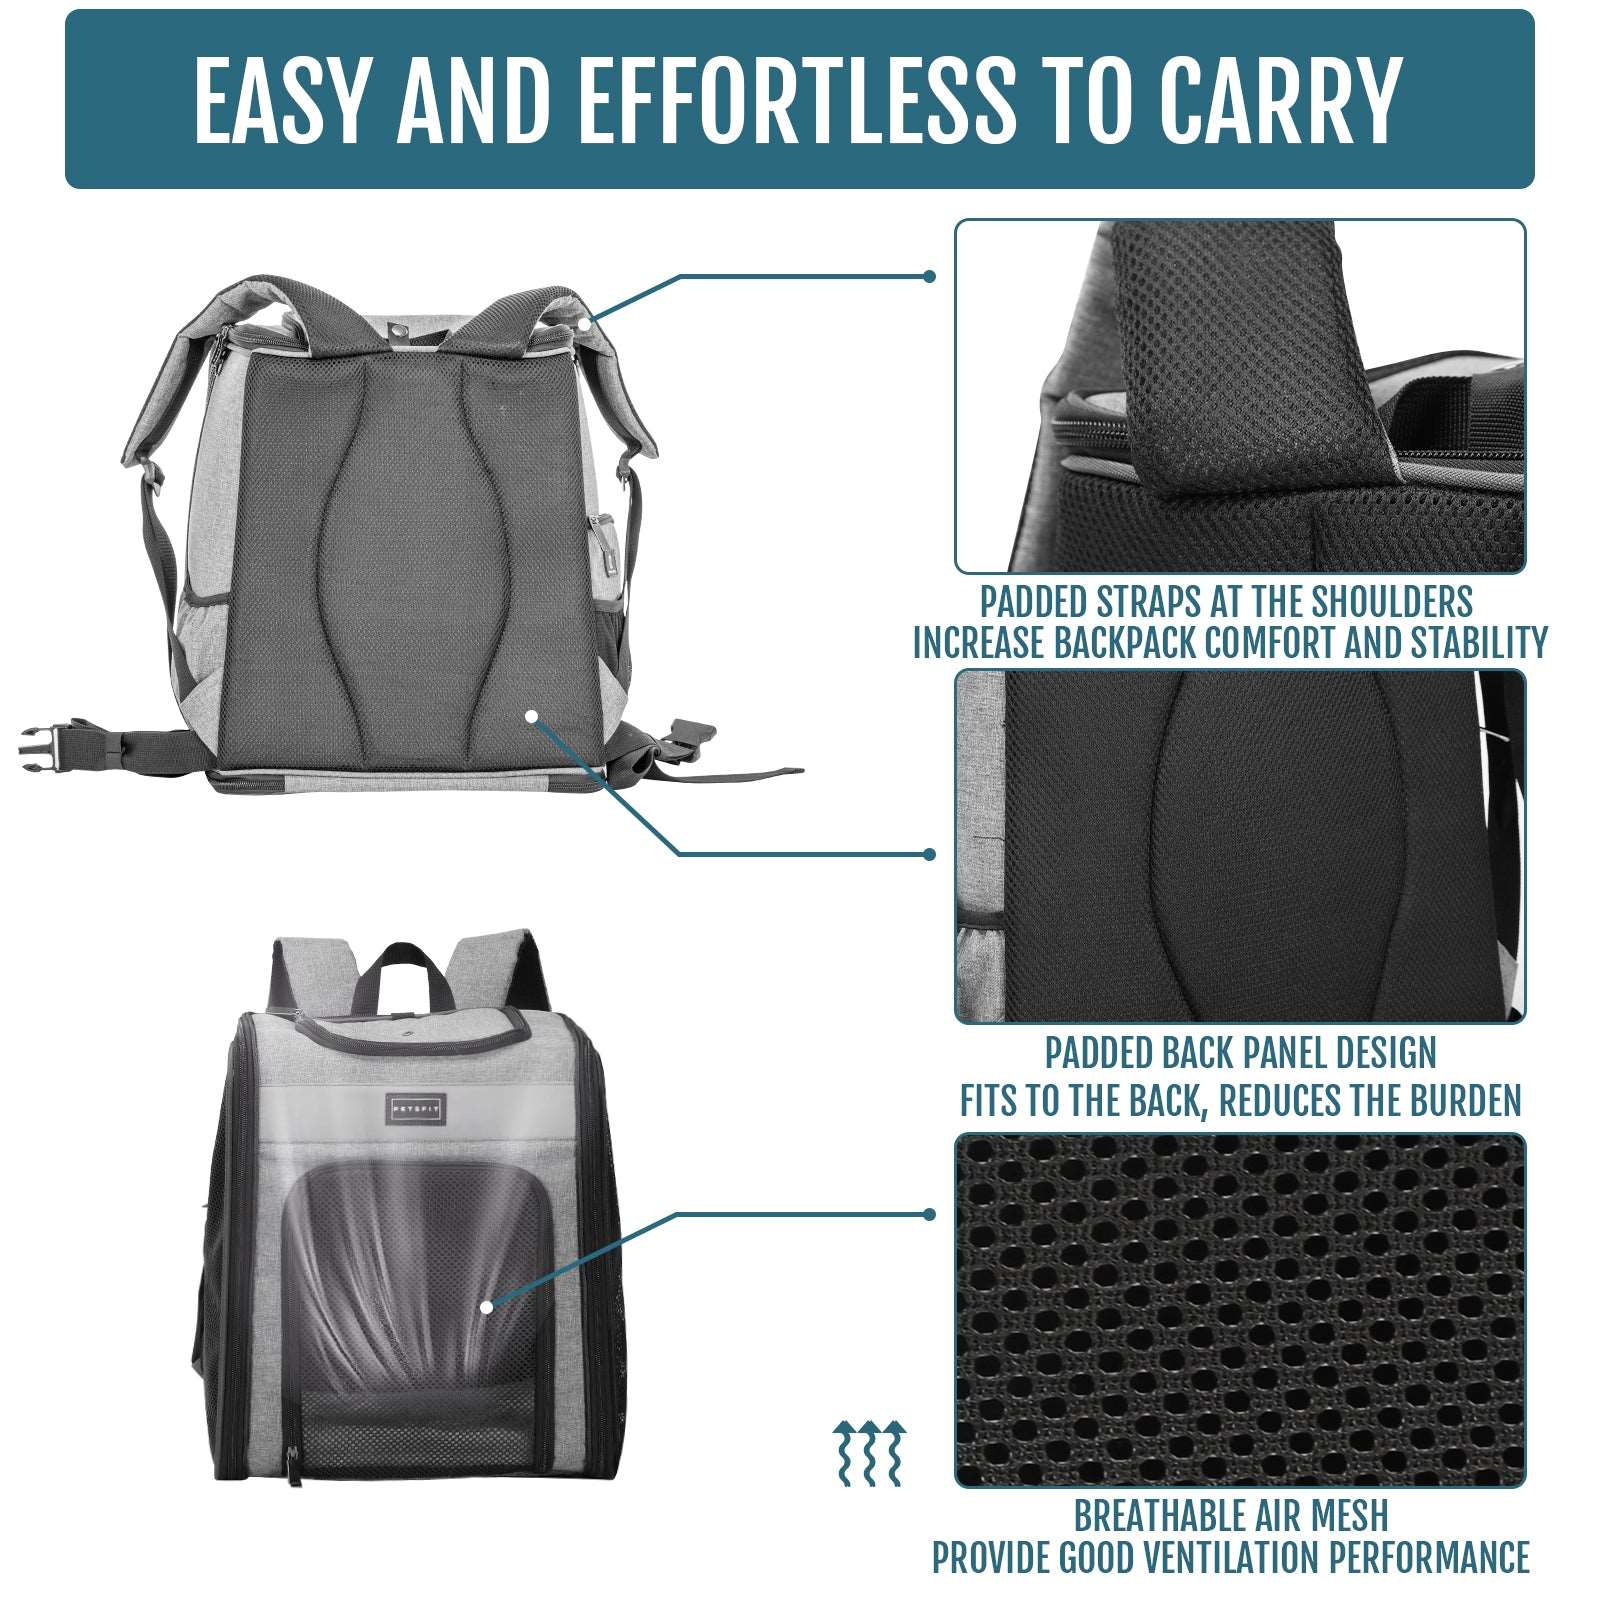 New Style Breathable Pet Carrier Backpack, Chest Back Strap, And